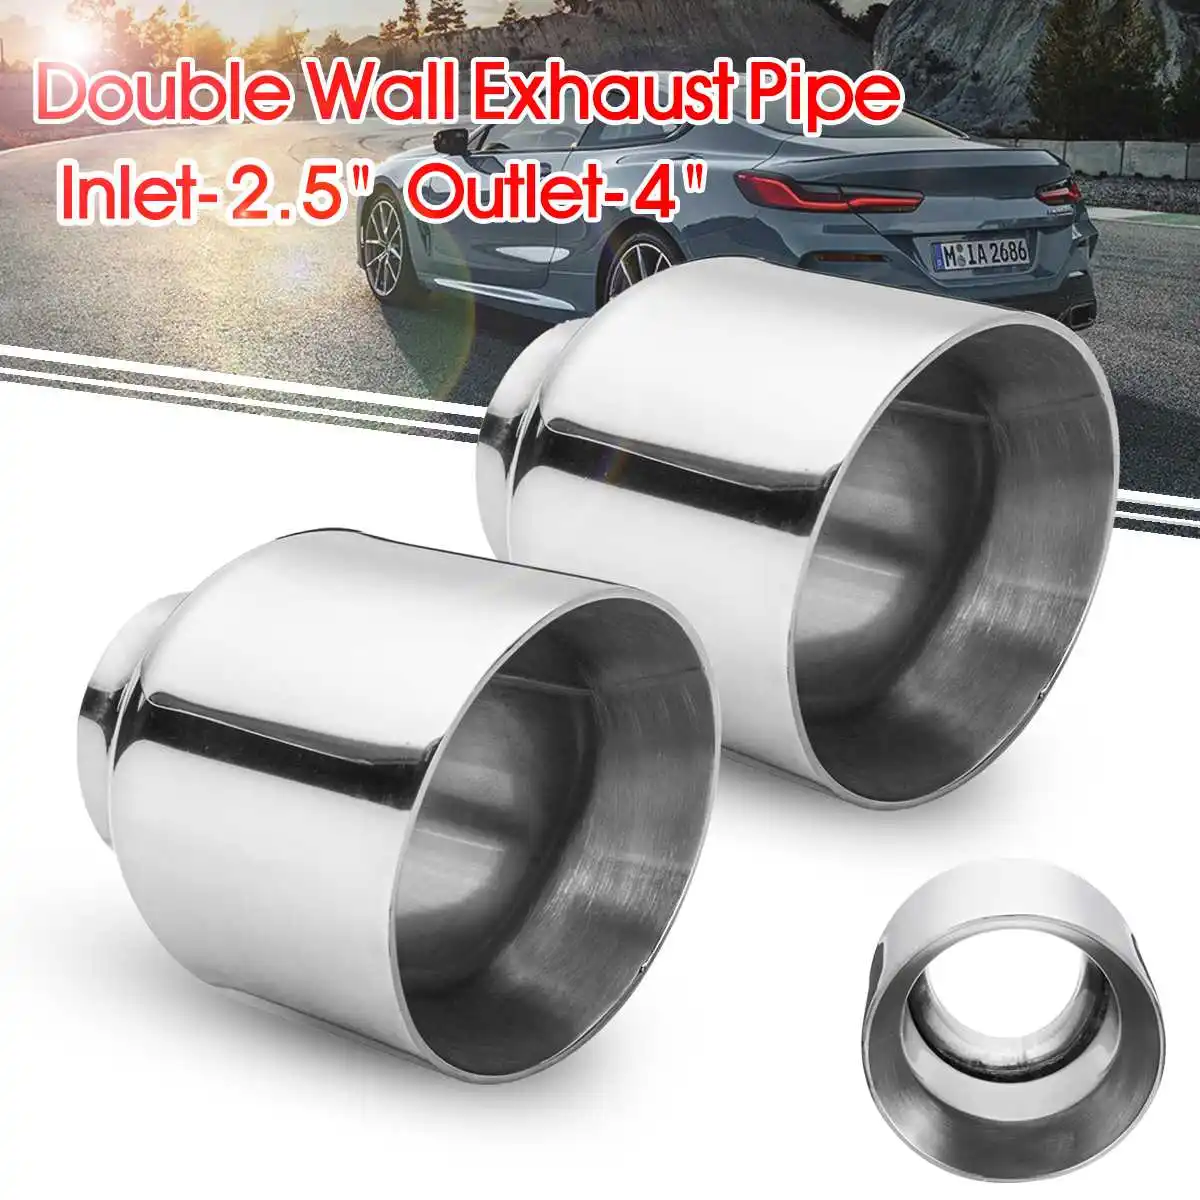 

1/2pcs Universal Car Exhaust Pipe 63mm-101mm Exhaust Tip 2.5"-4" Tail Tube Exhaust System Stainless Steel